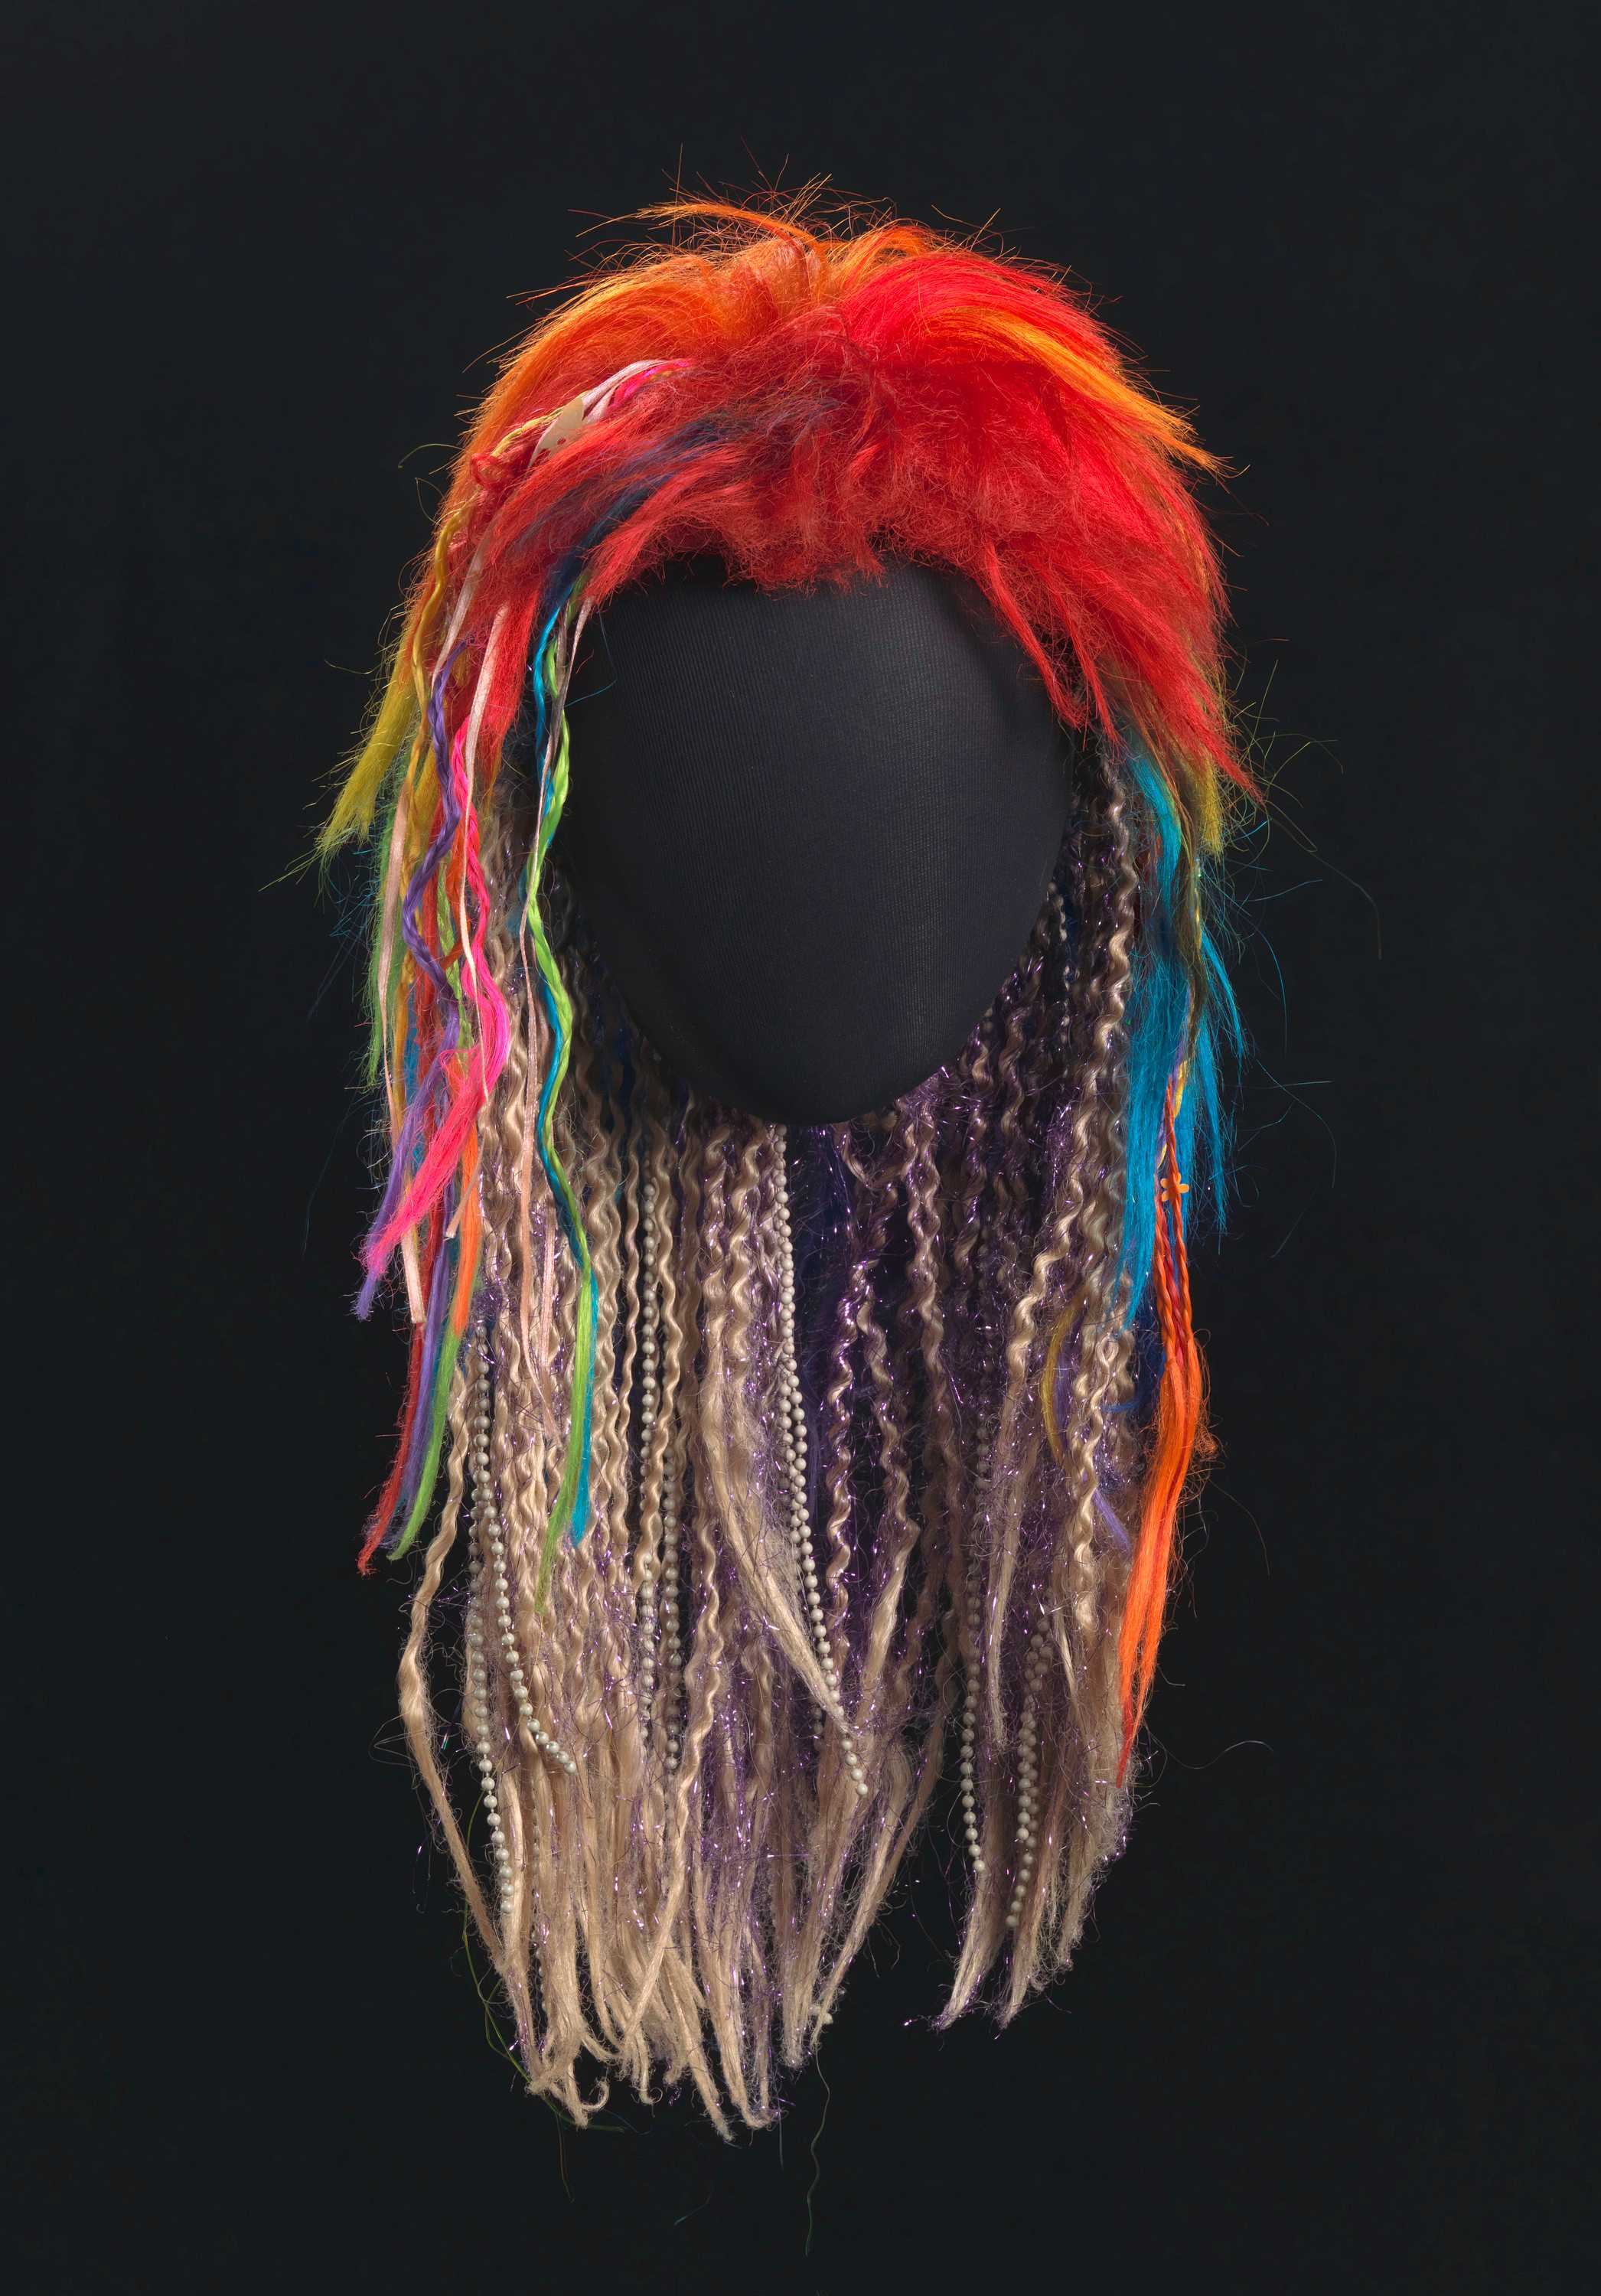 The rainbow wig is in a mullet shape with multiple colors. Some strands are crimped and braided.